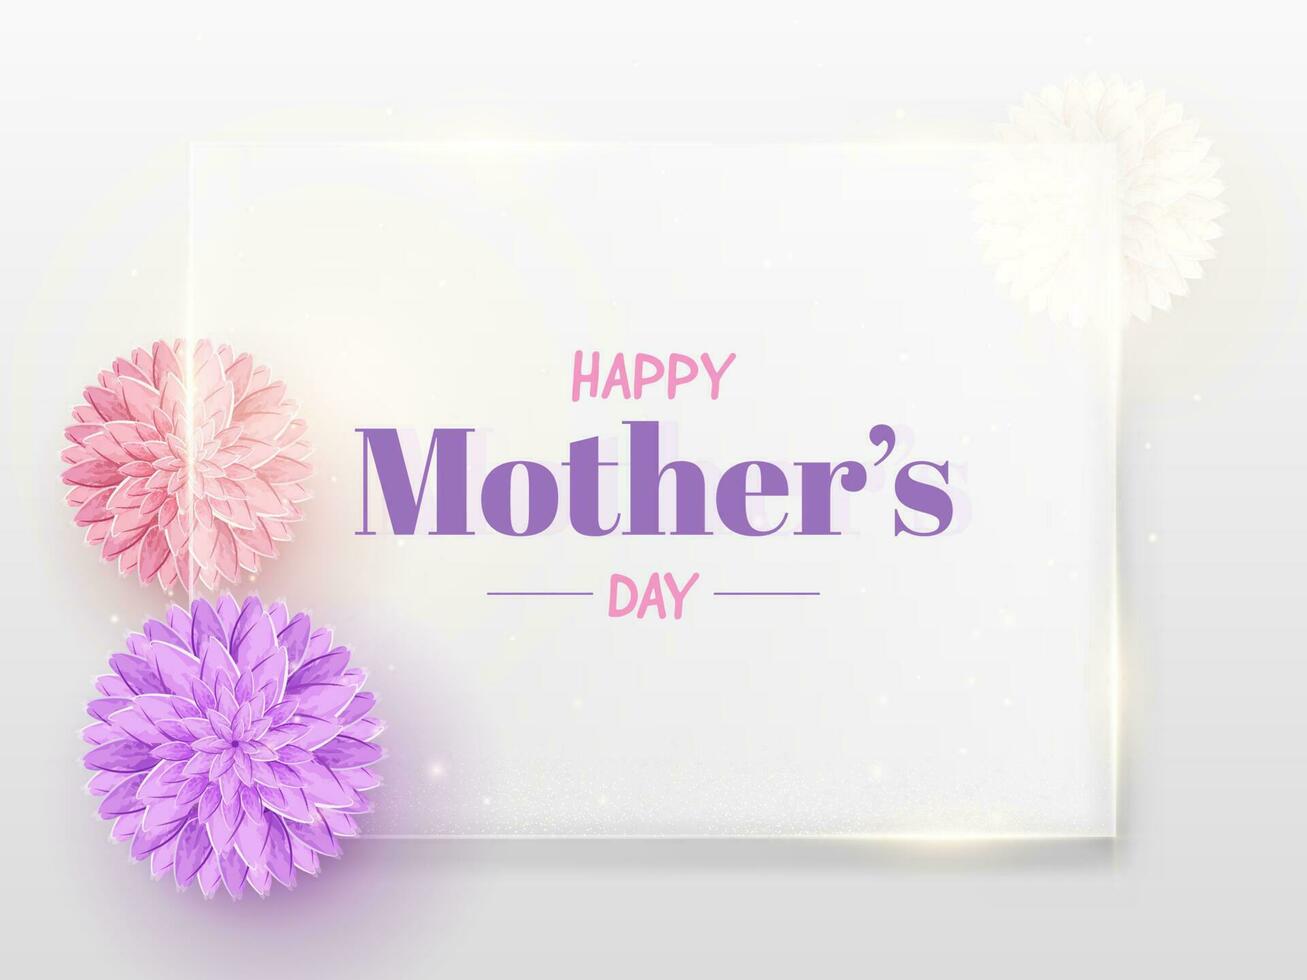 Happy Mother's Day Greeting Card With Beautiful Dahlia Flowers And Lights Effect On Translucent Screen Background. vector